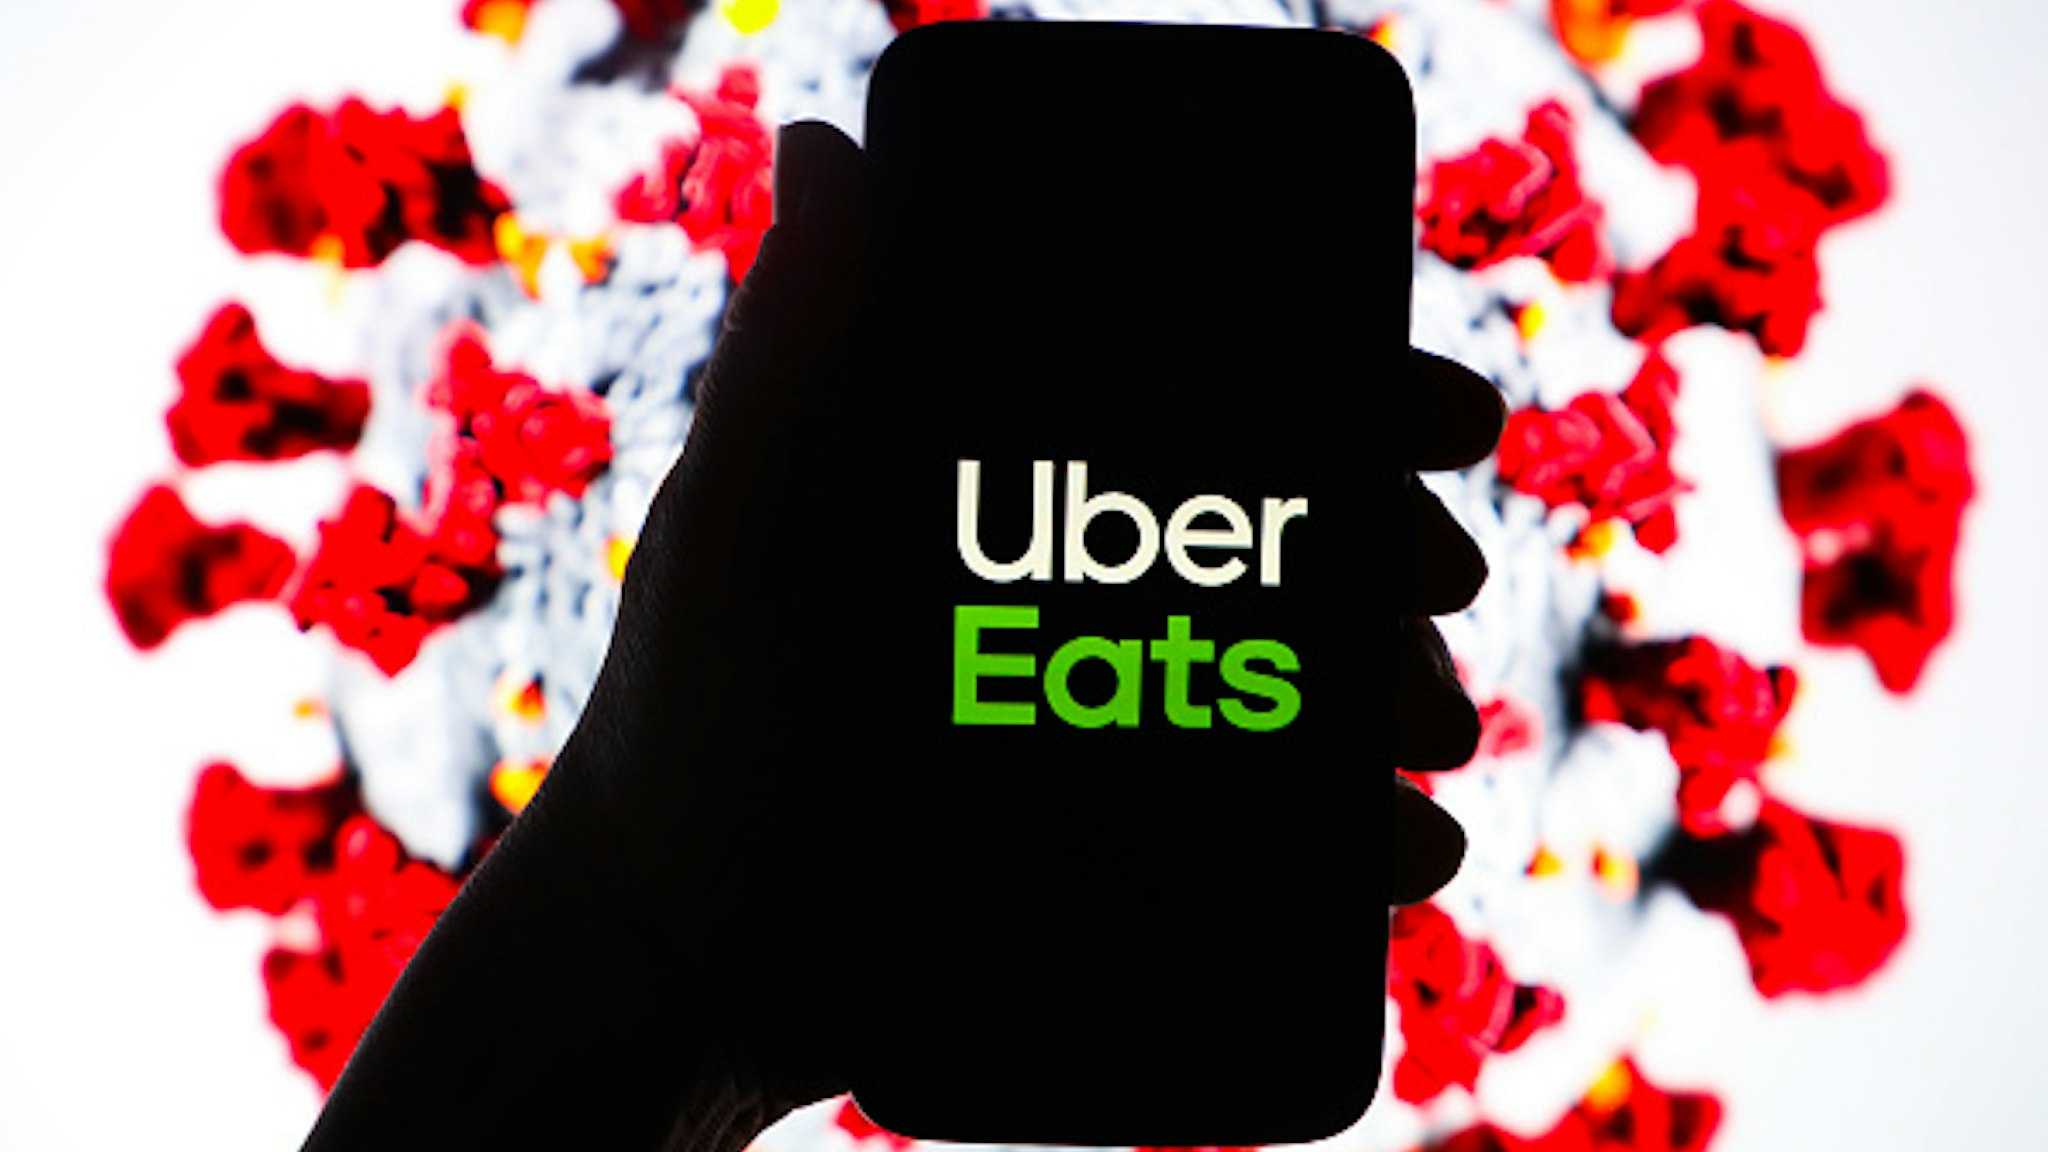 Uber Eats logo is displayed on a mobile phone screen photographed on SARS-CoV-2 illustration graphic background. Krakow, Poland on 11th March, 2020.